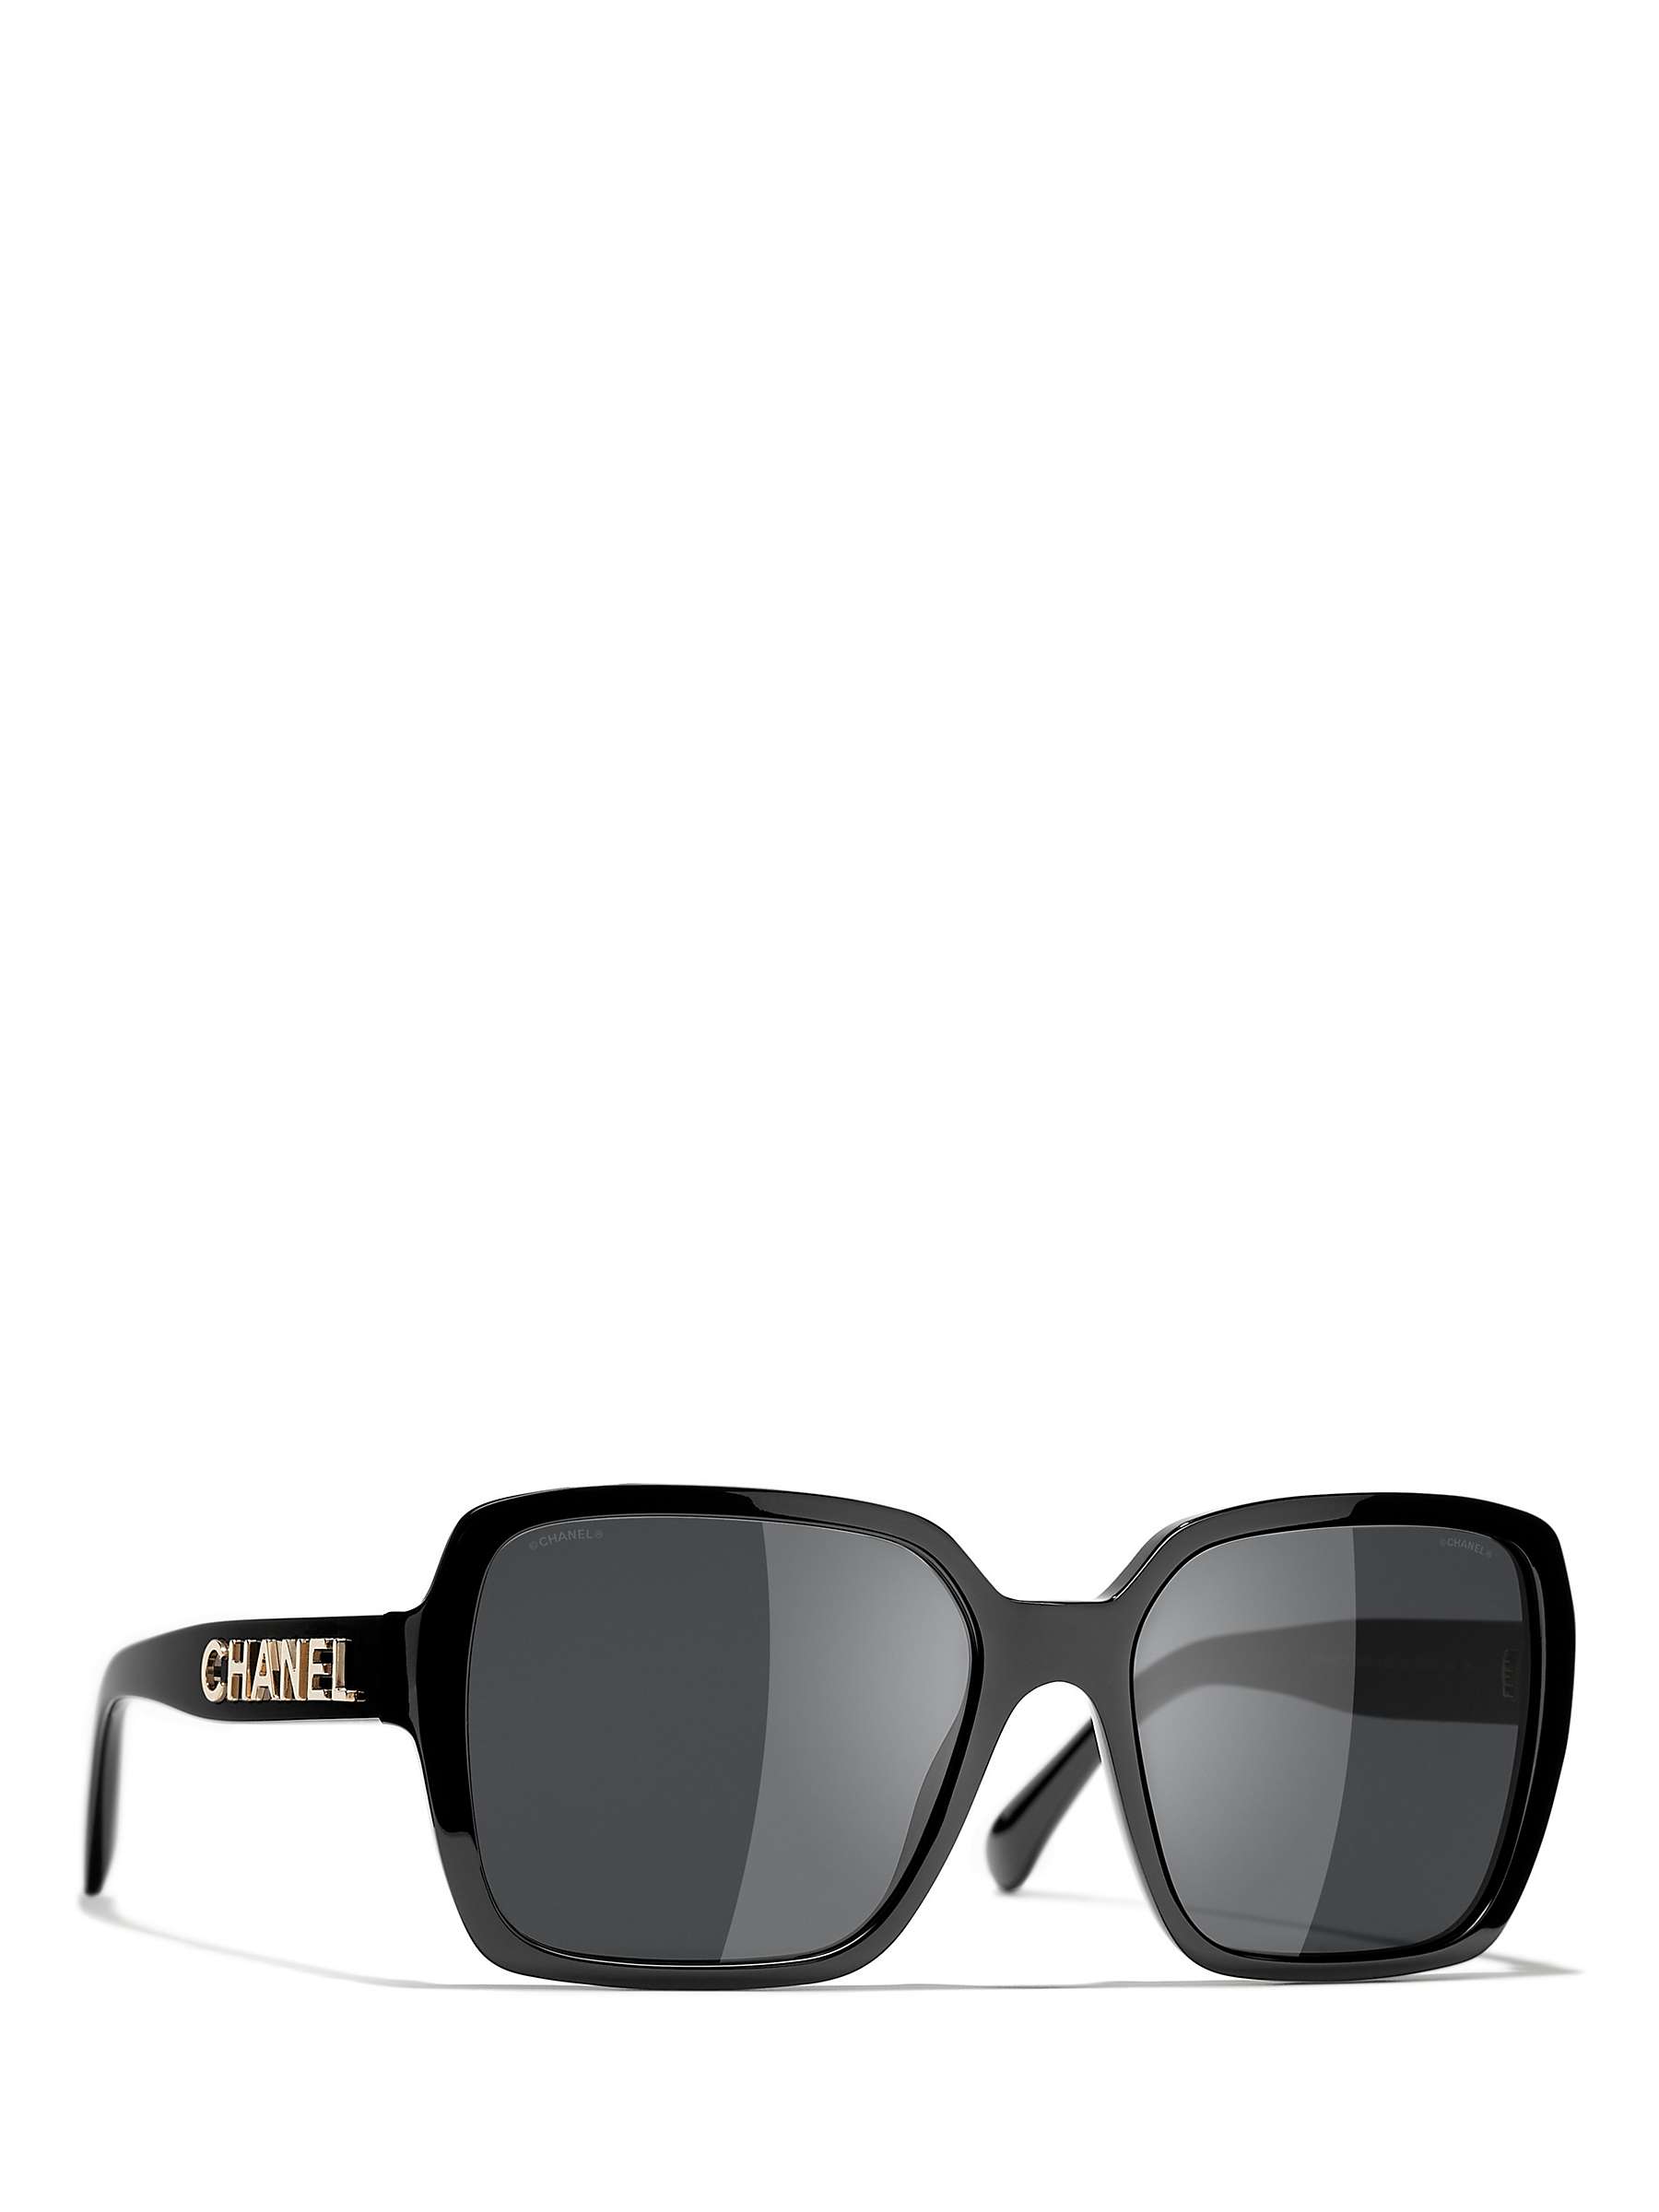 Buy CHANEL Pillow Sunglasses CH5408, Black Online at johnlewis.com